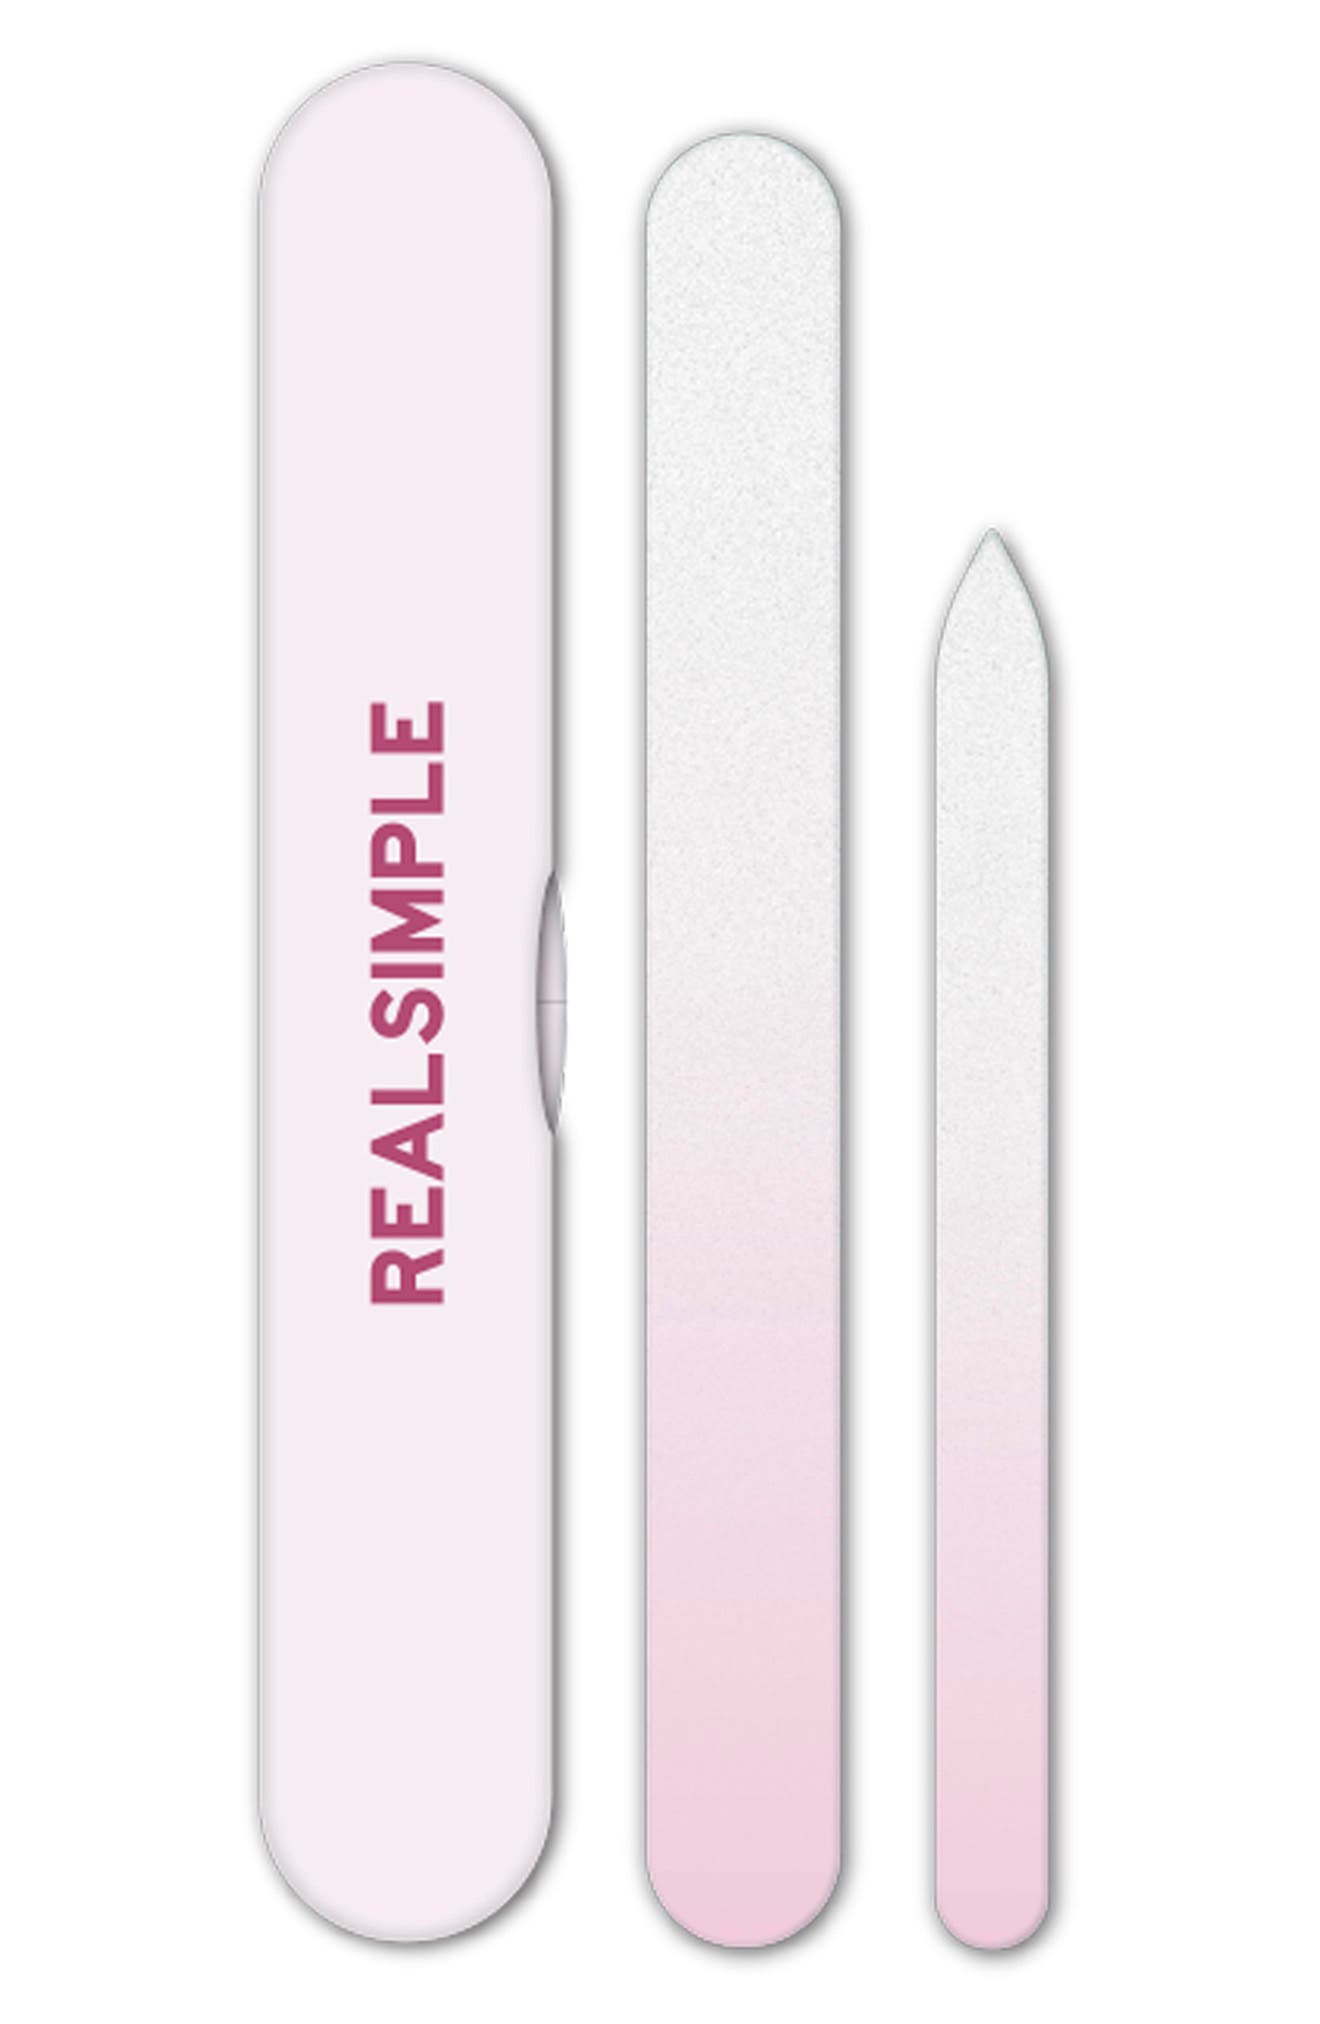 Real Simple 2-pack Glass Nail Files W/ Case